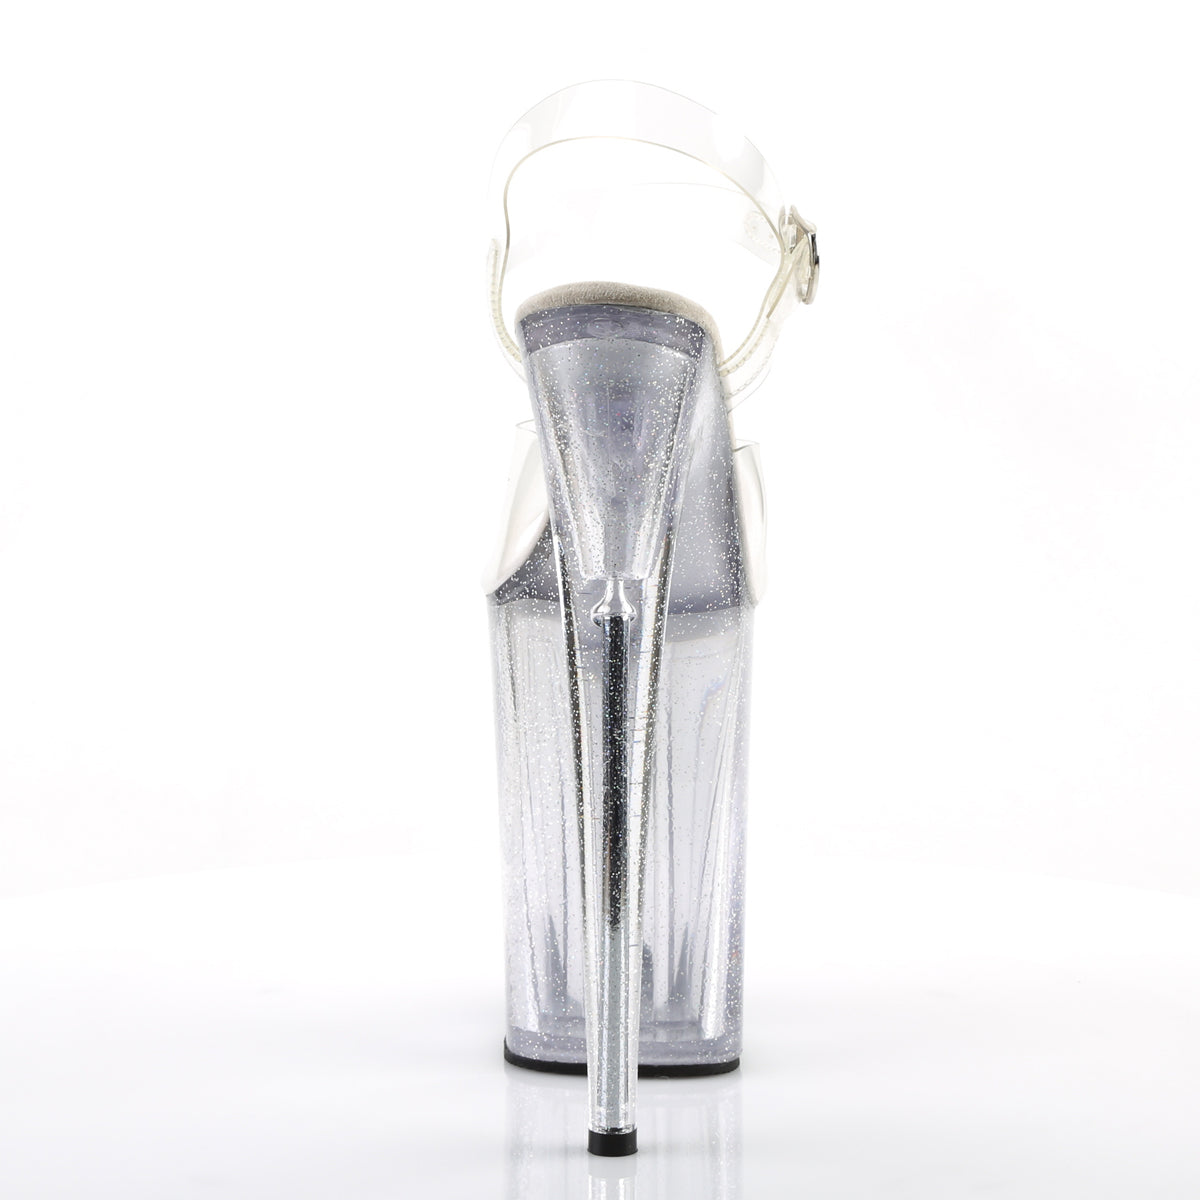 INFINITY-908MG Pleaser Transparent Clear Platform Shoes [9 Inch High Heels]